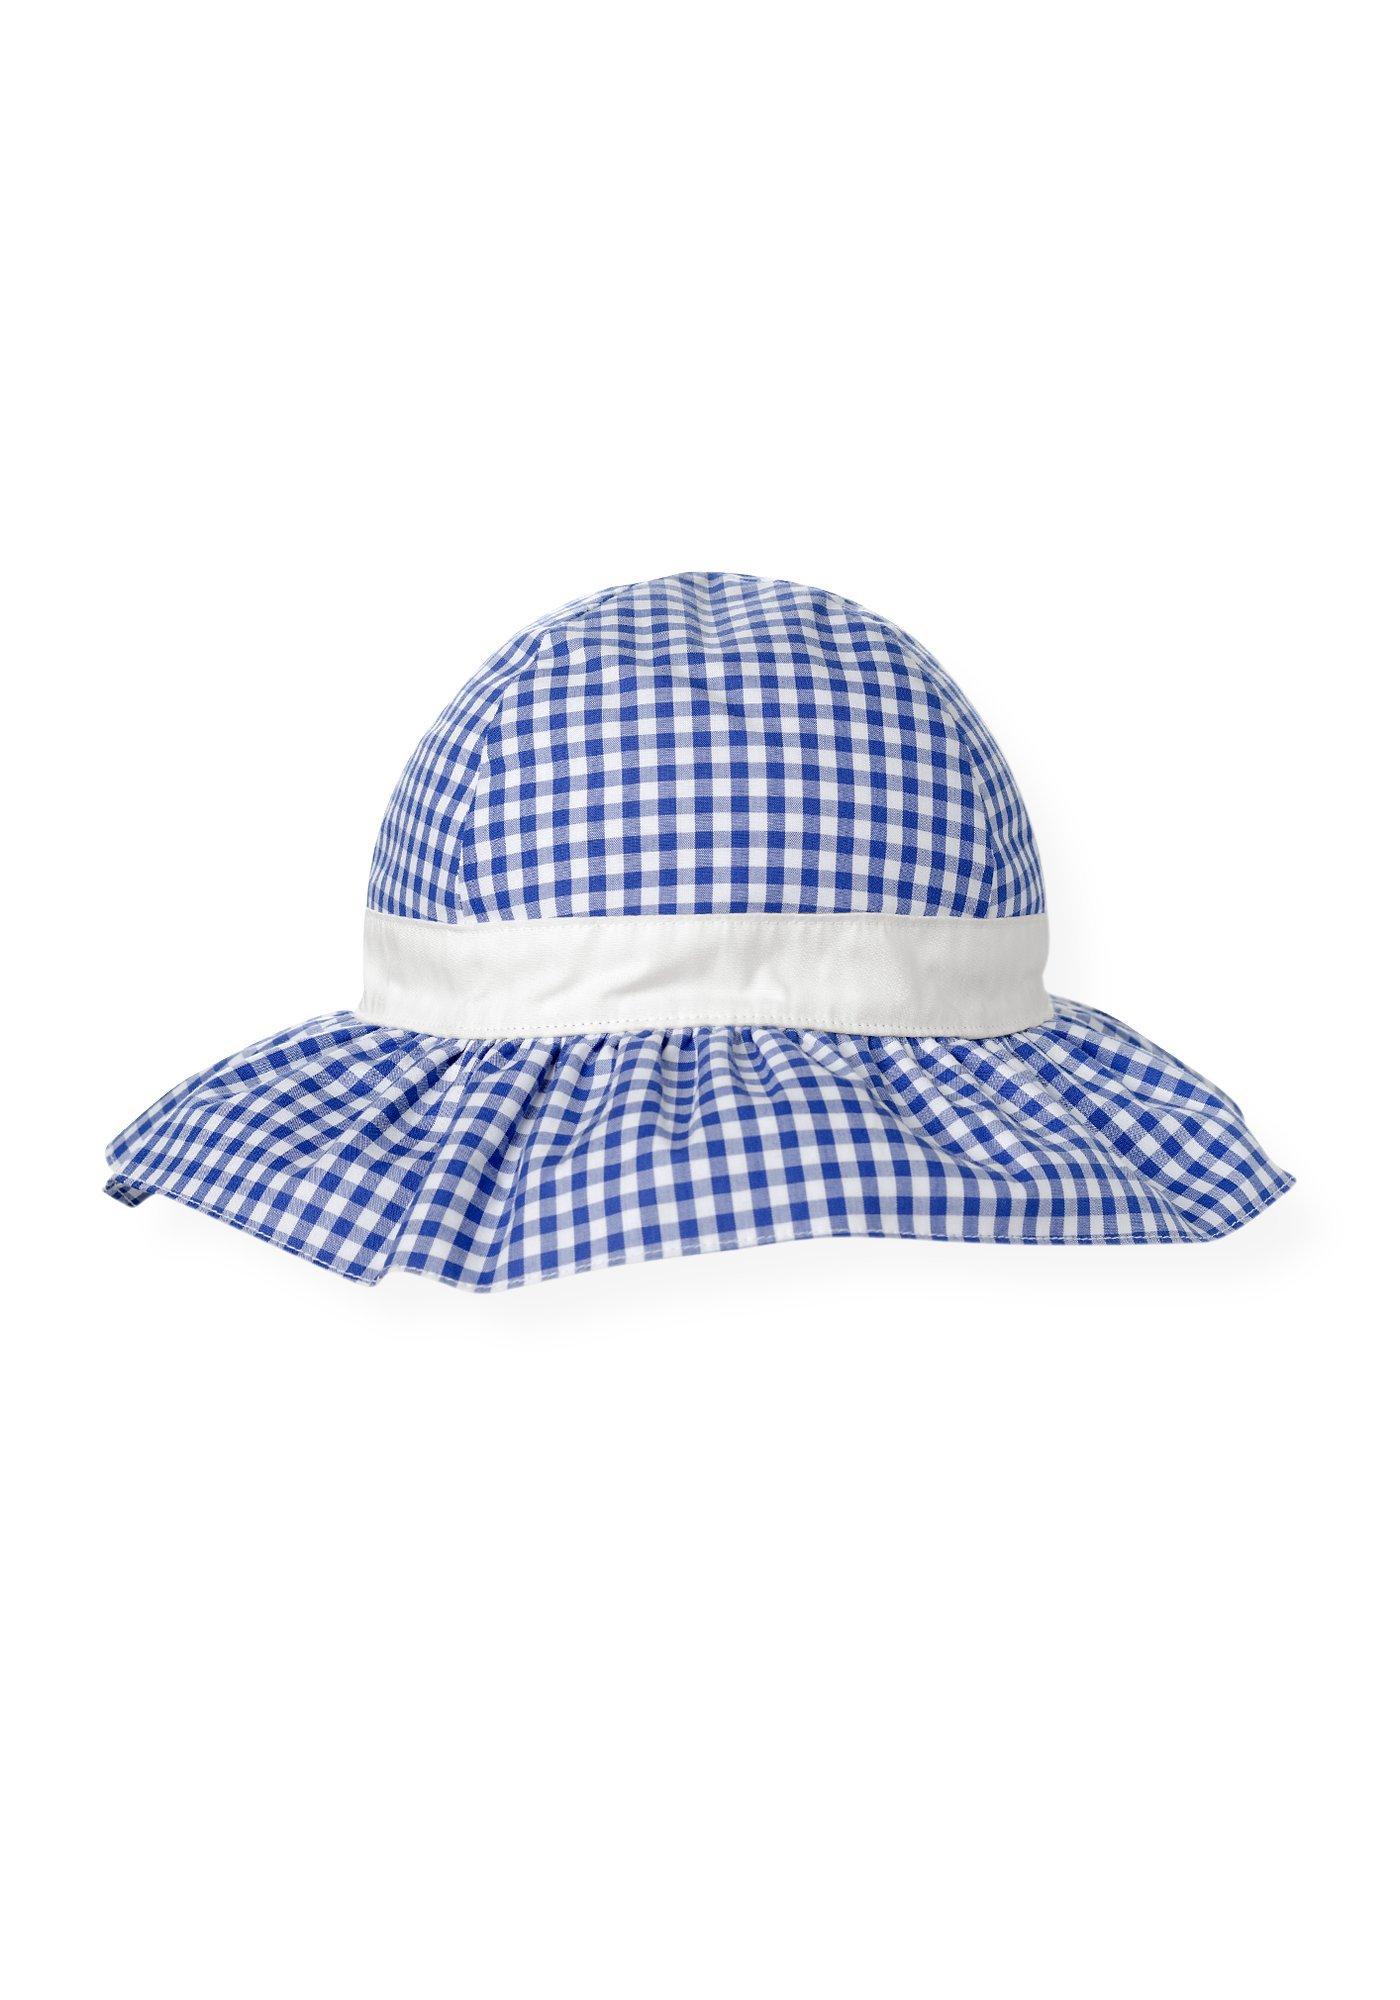 Gingham Sunhat image number 0